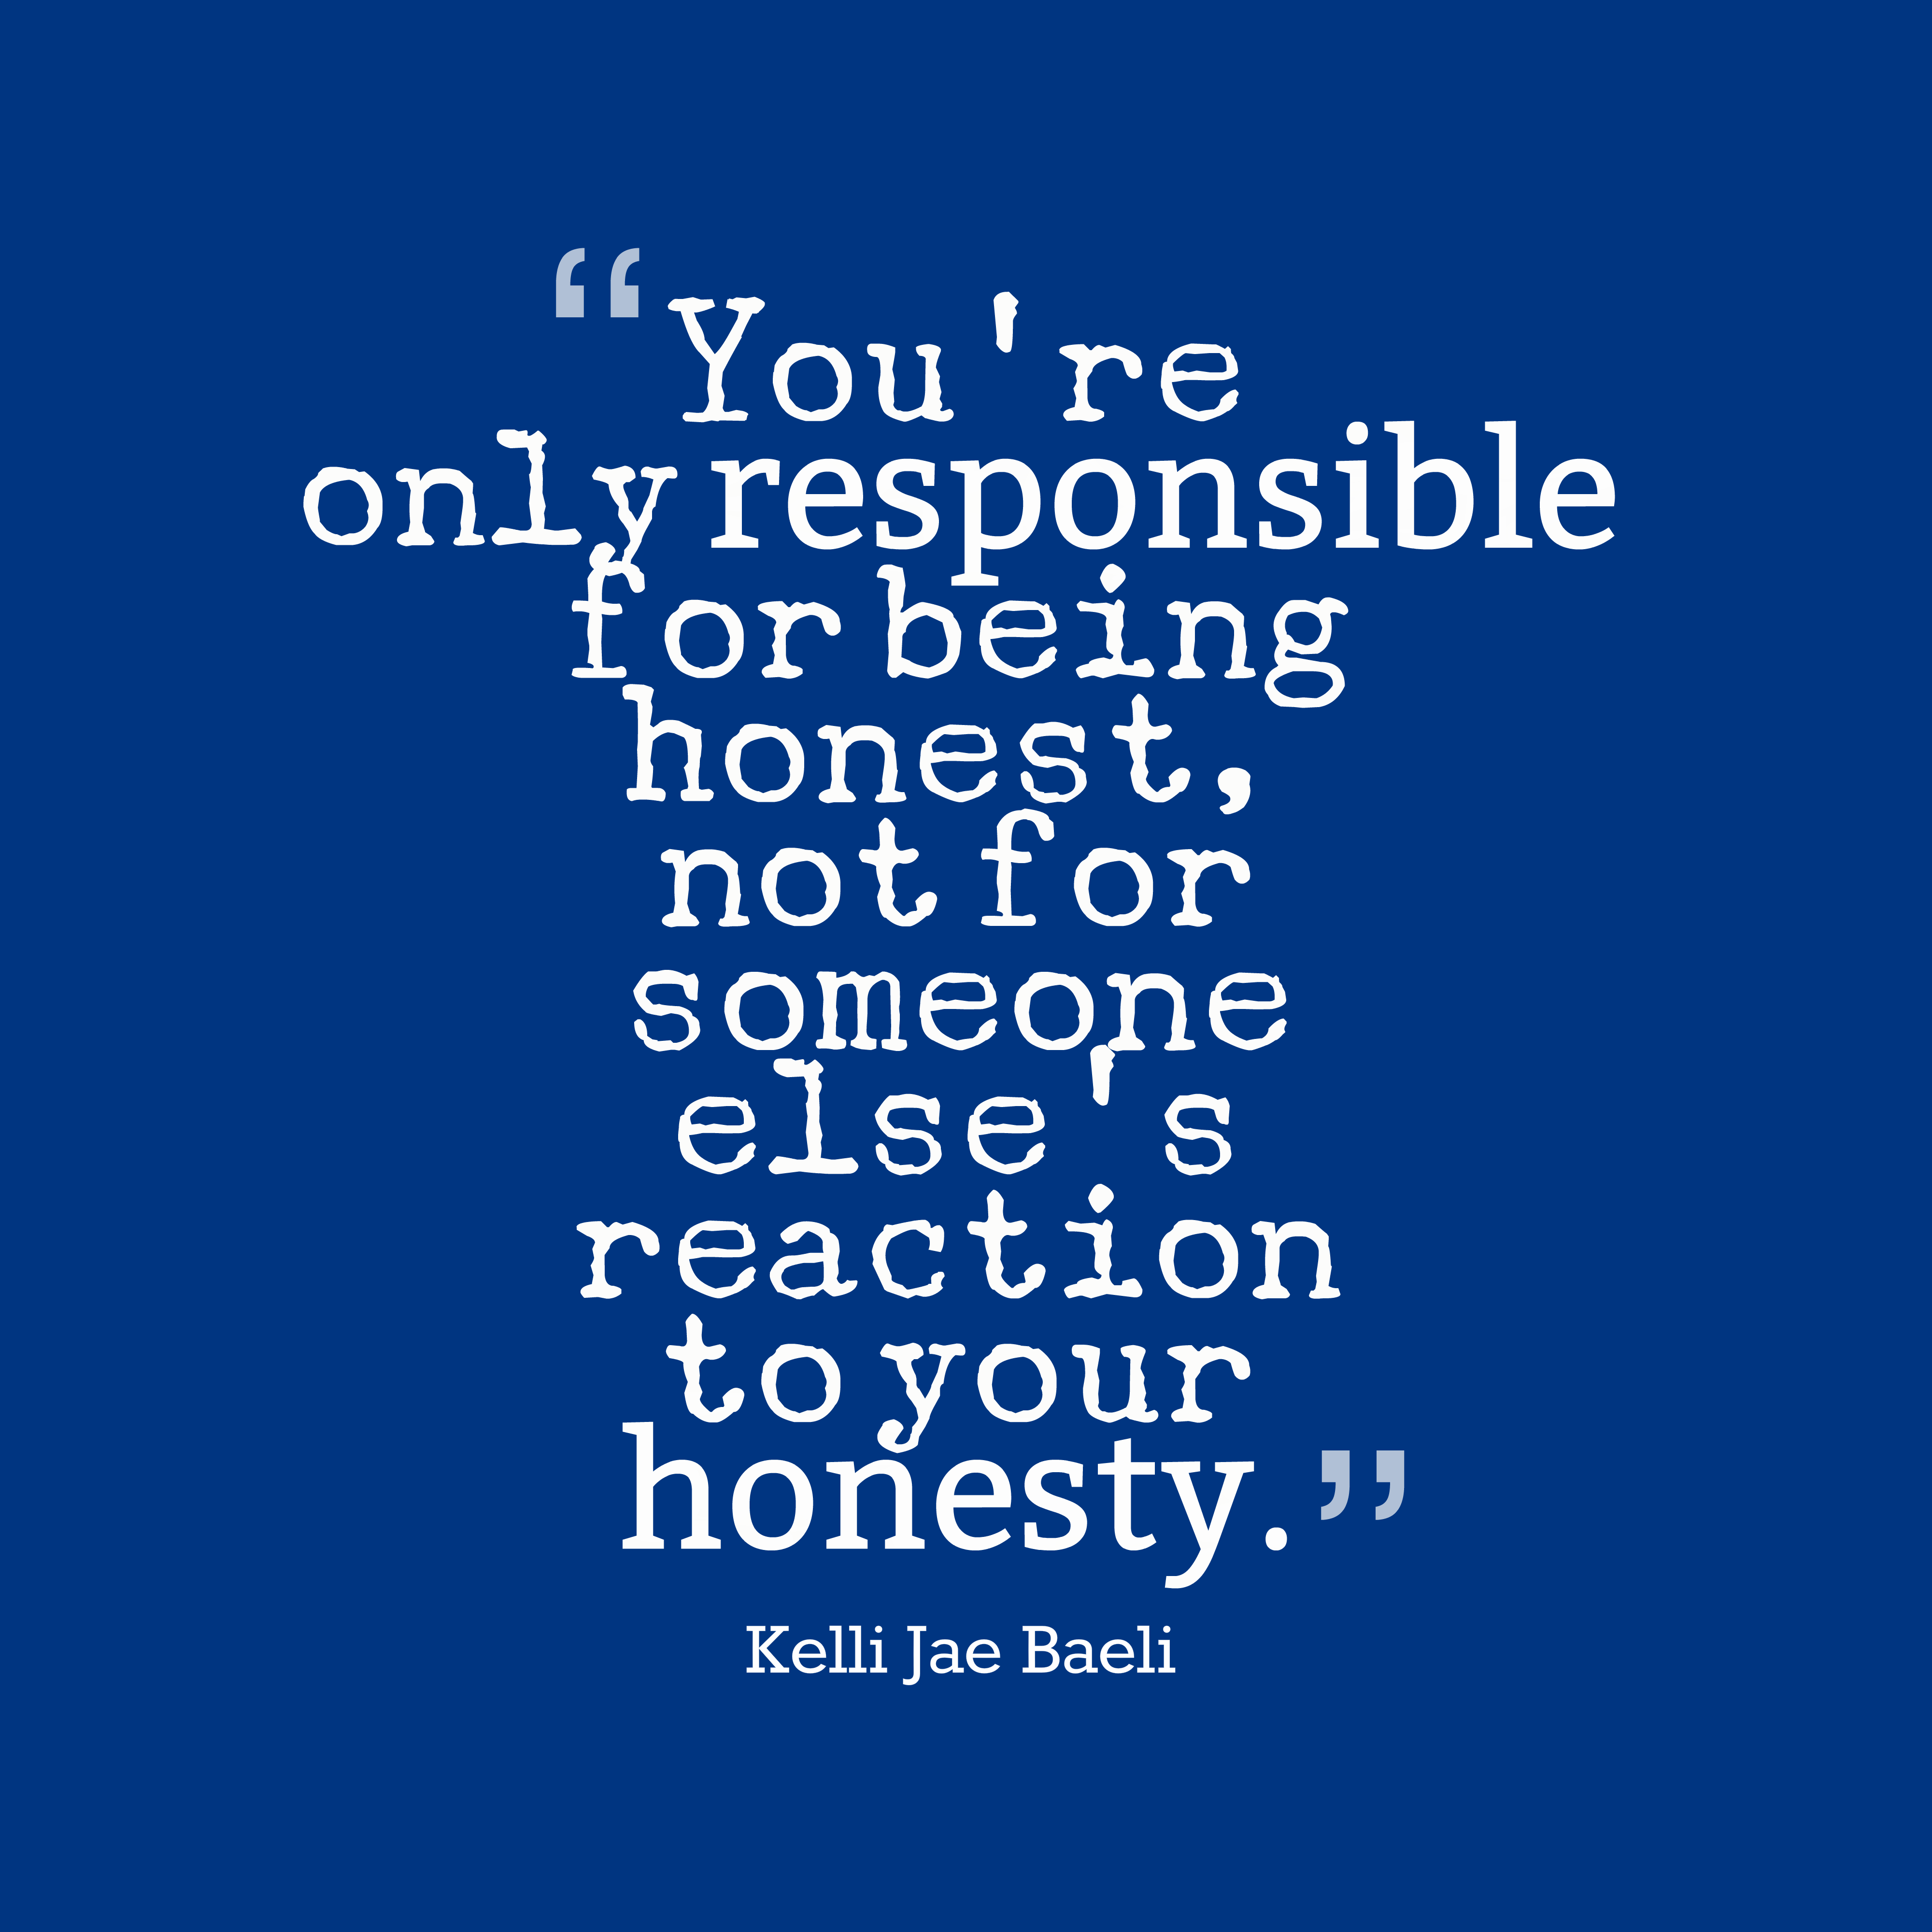 Being Responsible Quotes